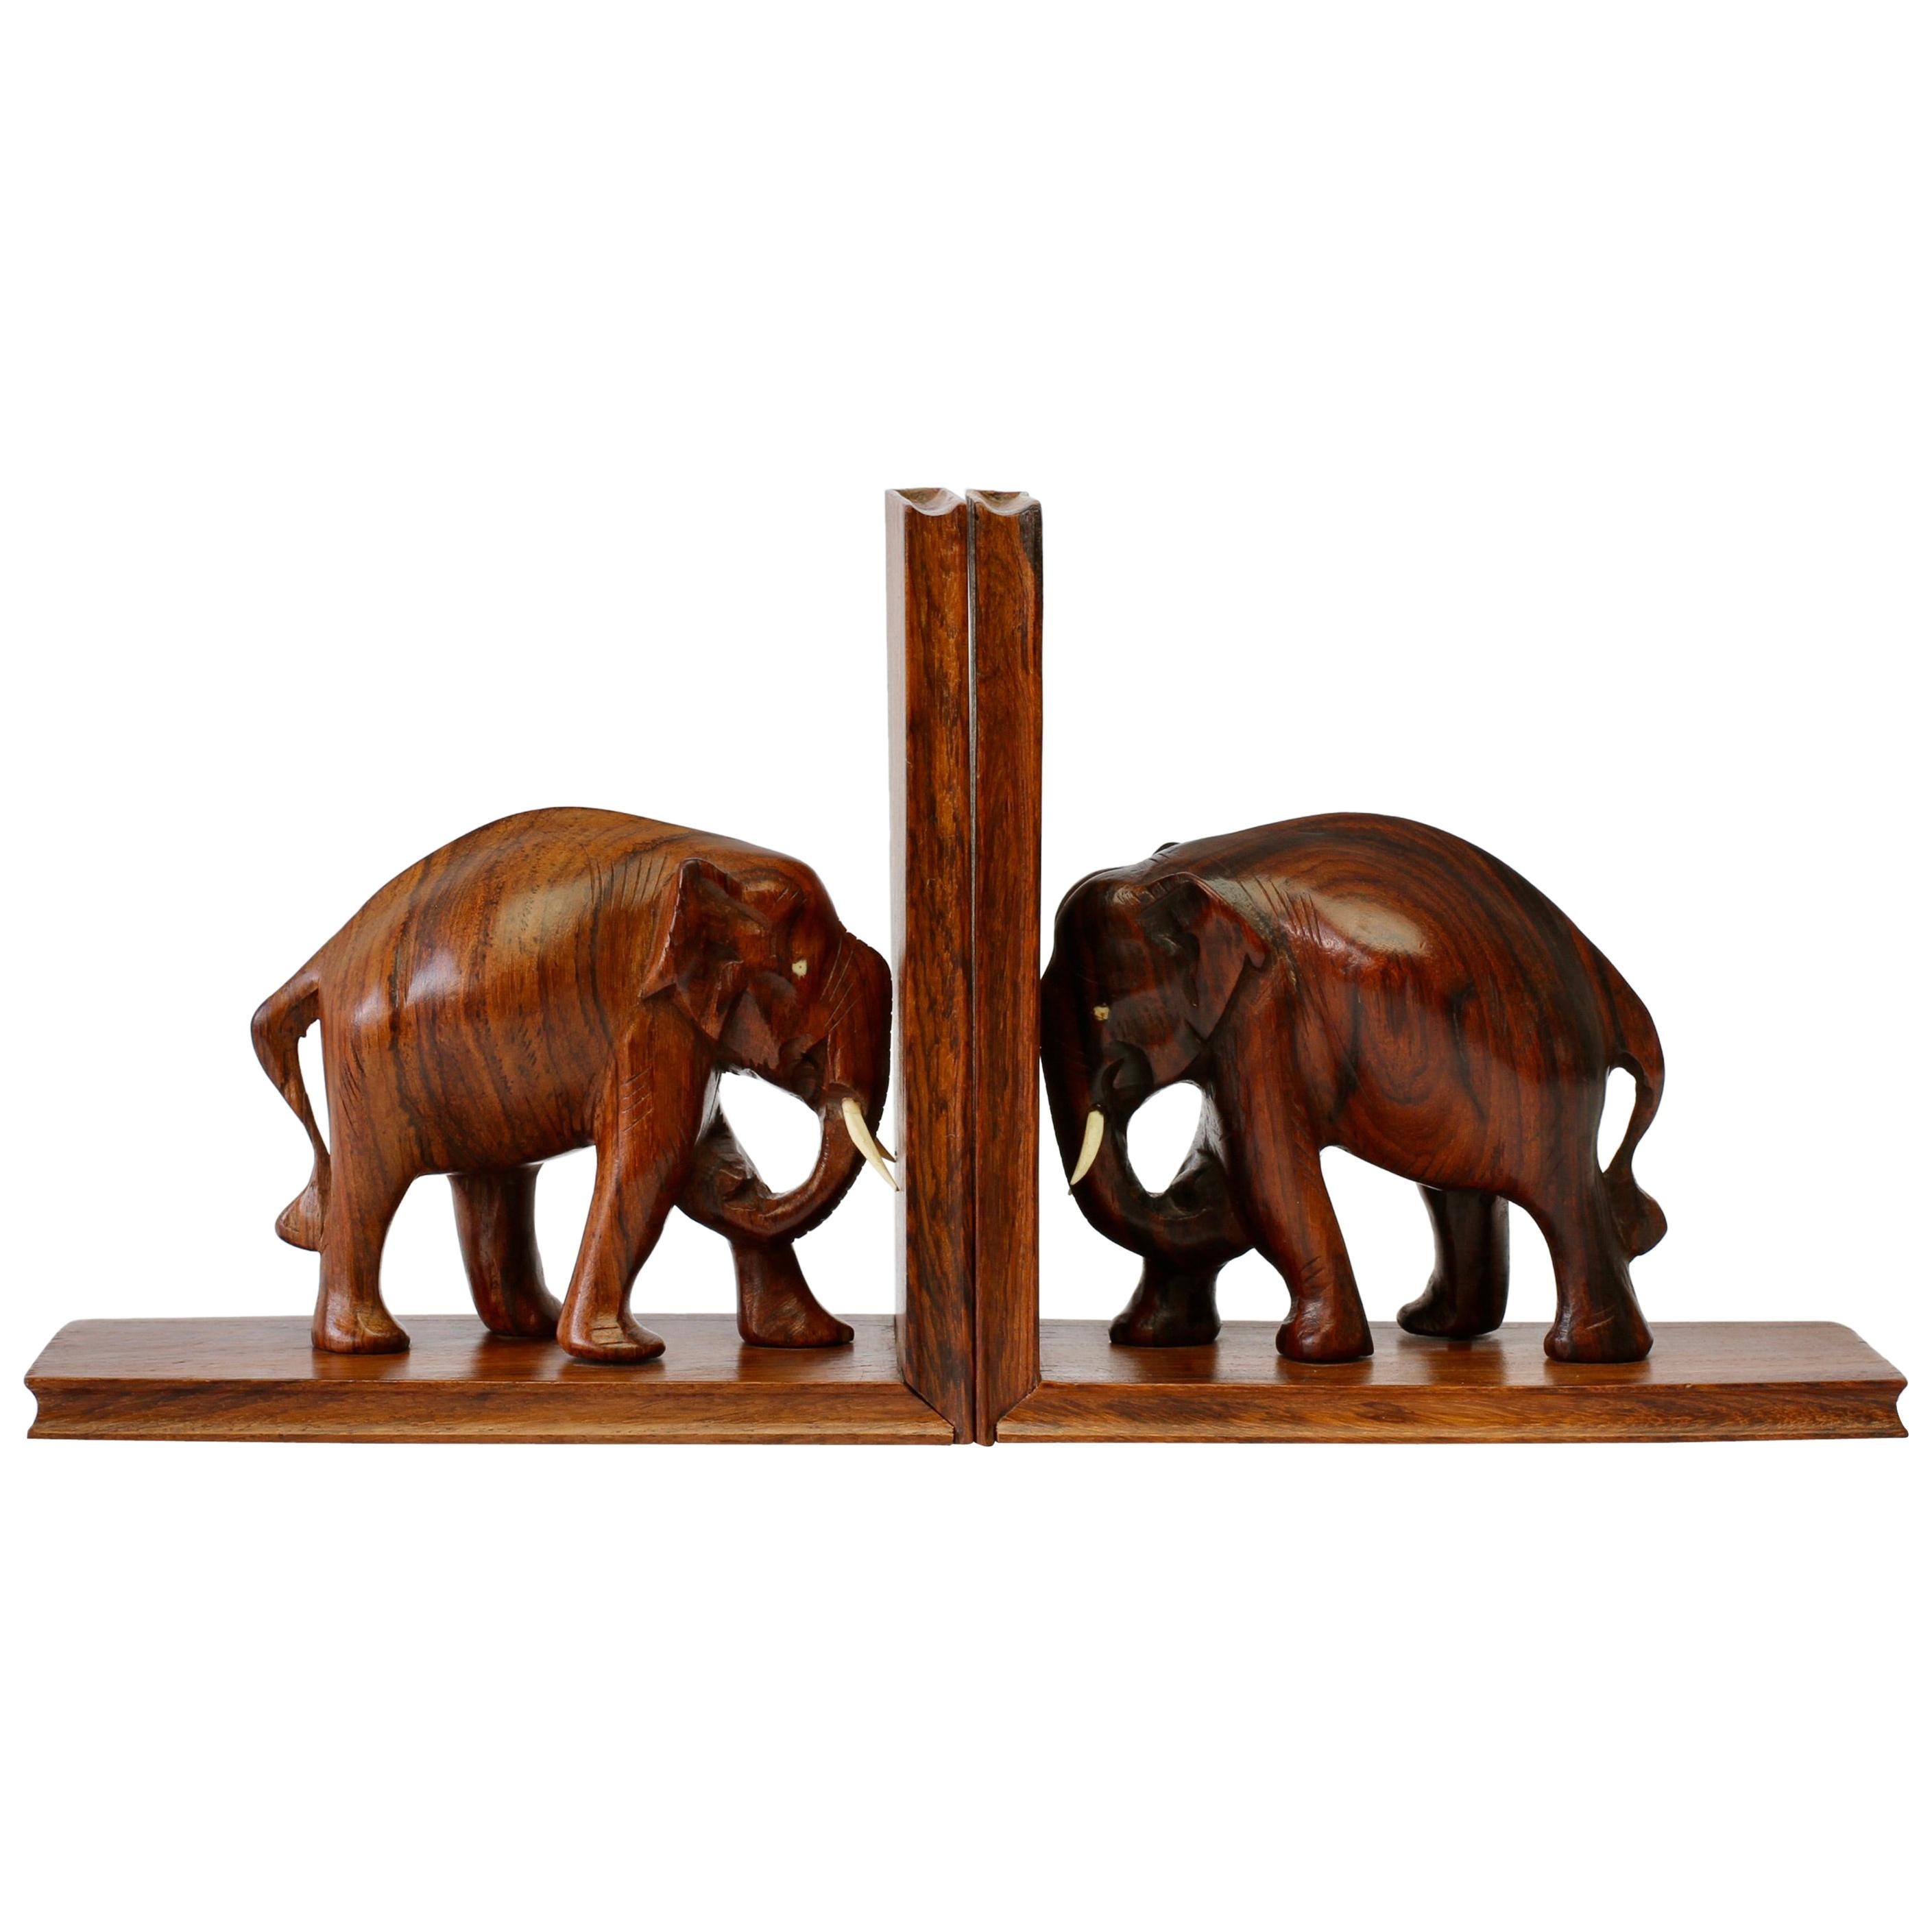 Hand Carved Wooden Book Ends with Elephant Sculptures / Figures, circa 1960s